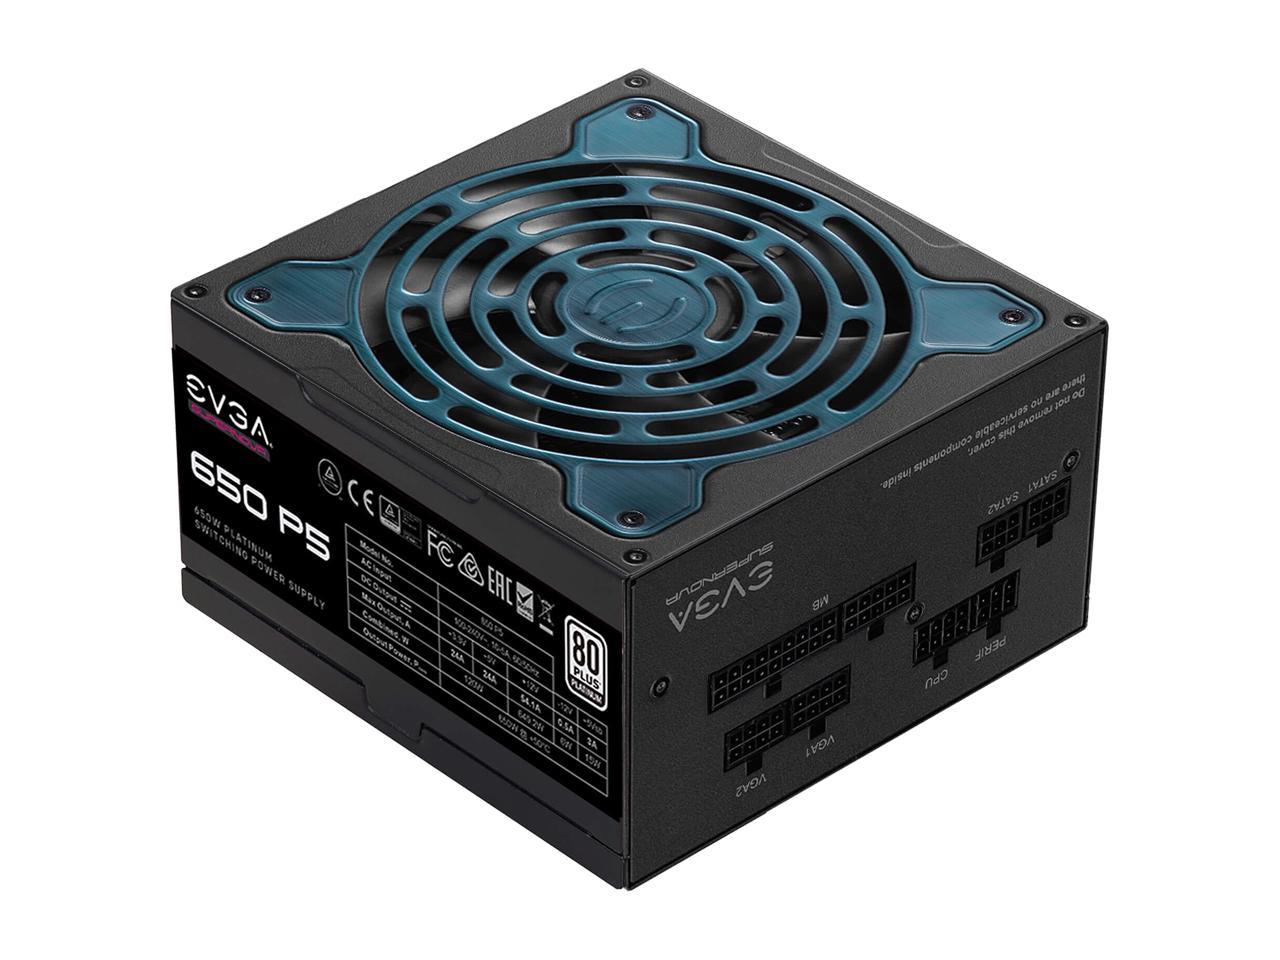 EVGA SuperNOVA 650 P5, 80 Plus Platinum 650W, Fully Modular, Eco Mode with FDB Fan, 10 Year Warranty, Includes Power ON Self Tester, Compact 150mm Size, Power Supply 220-P5-0650-X1